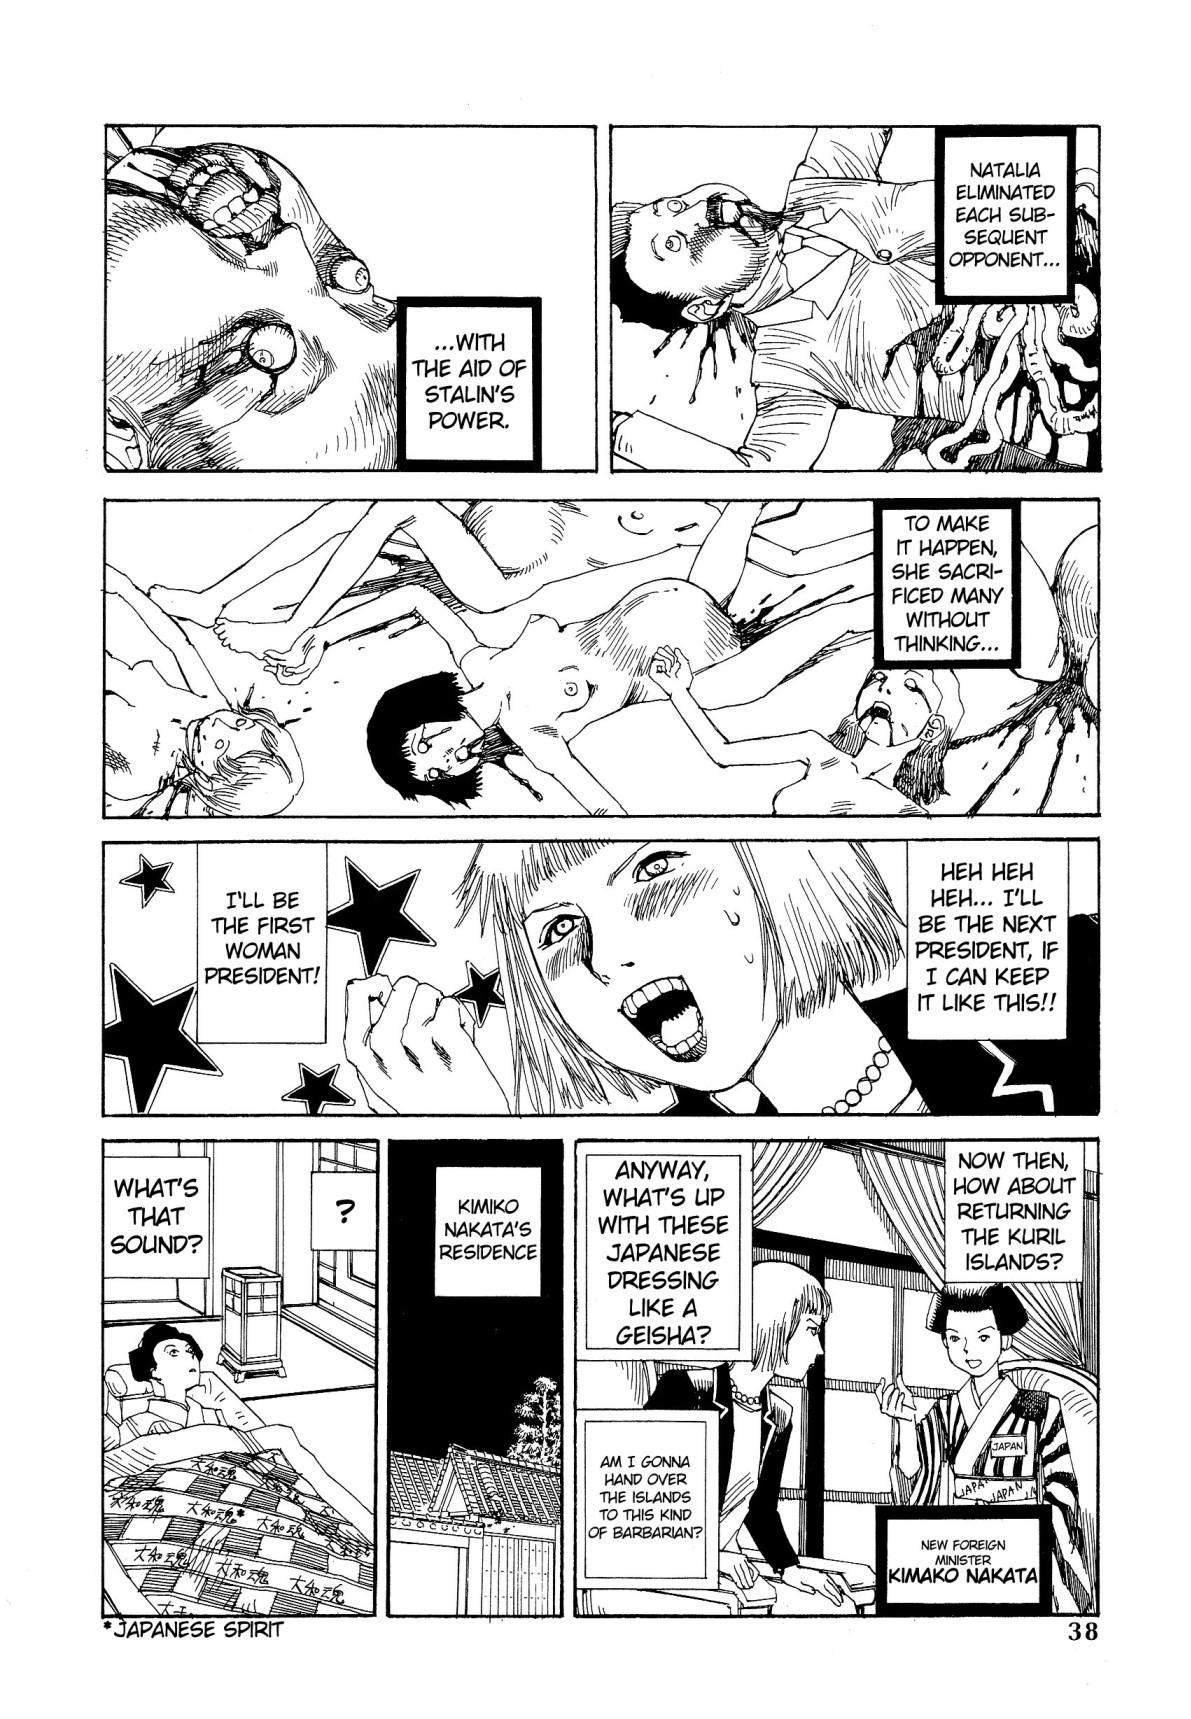 Ejaculation Shintaro Kago - Under the Star of the Red Flag Heels - Page 12